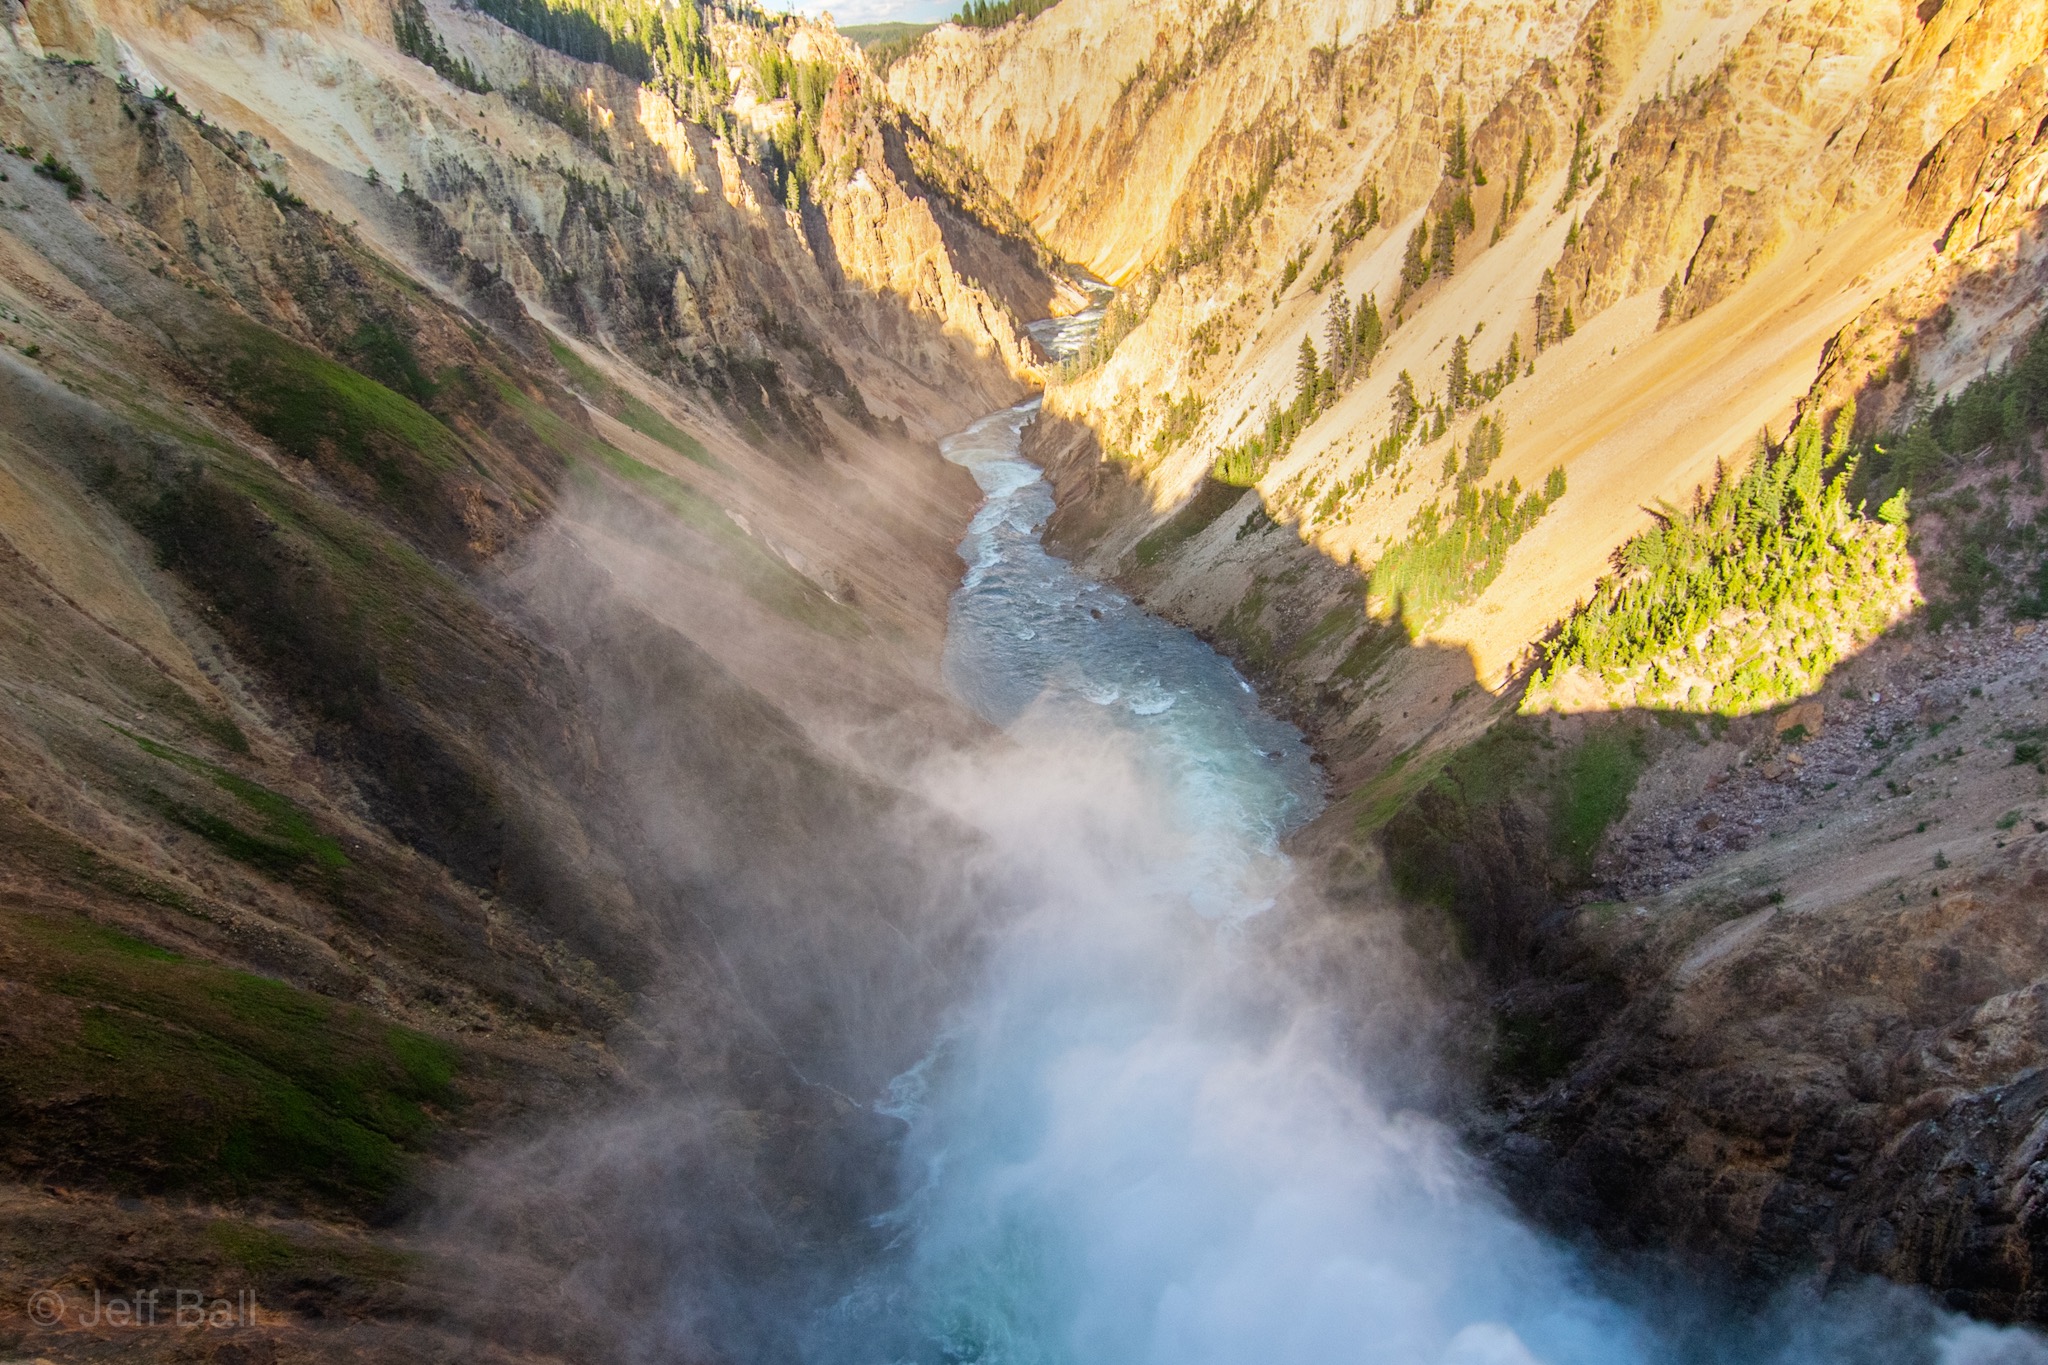 Brink of Lower Falls of Yellowstone